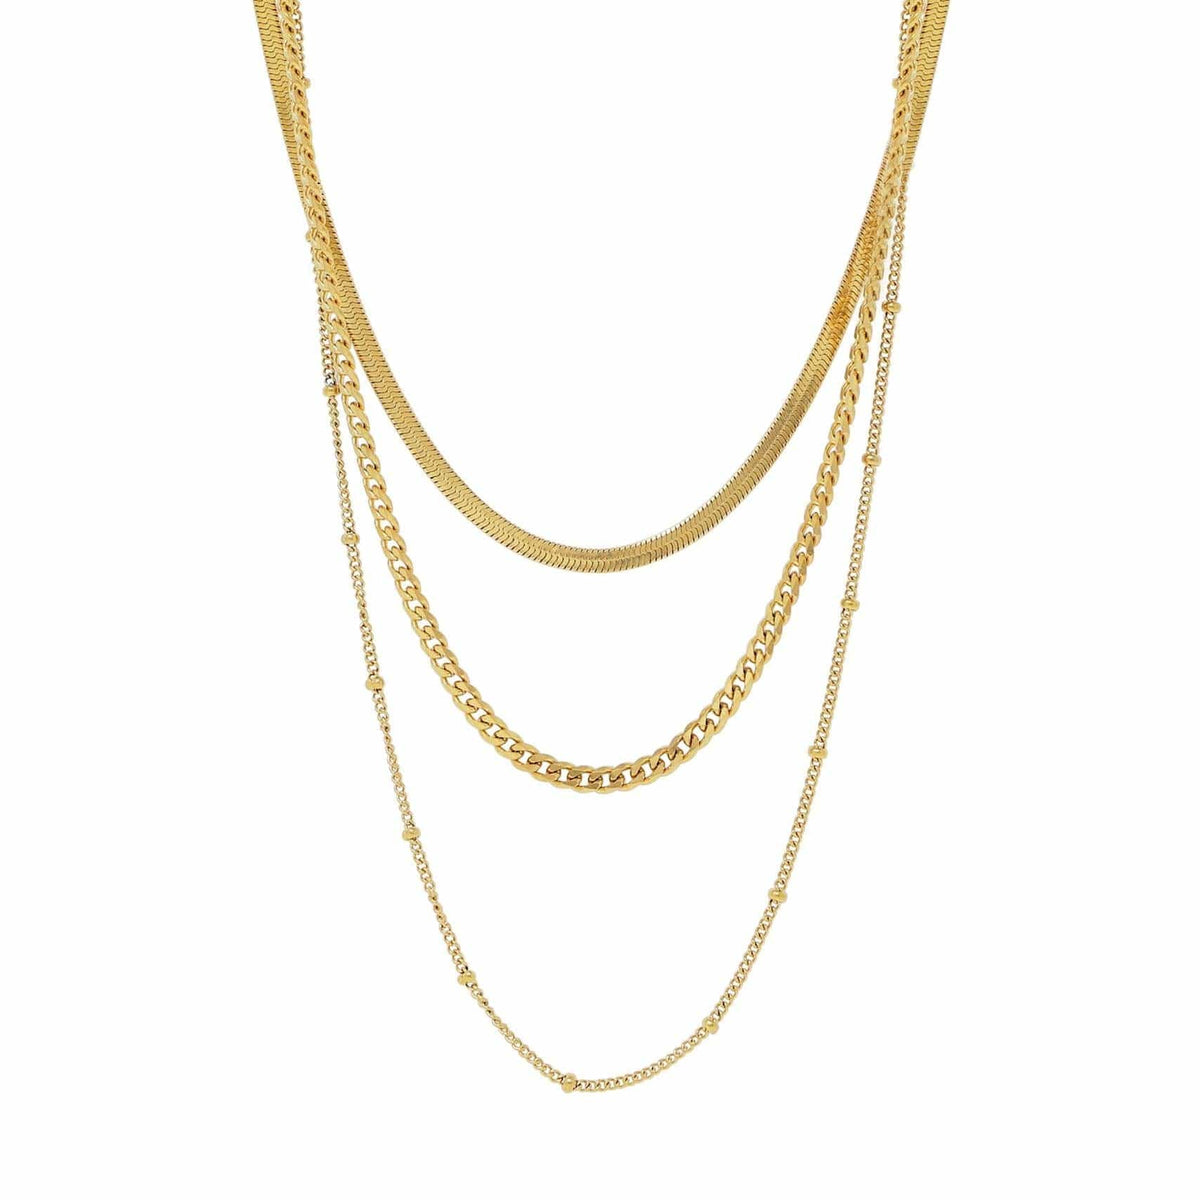 BohoMoon Stainless Steel Everly Layered Necklace Gold